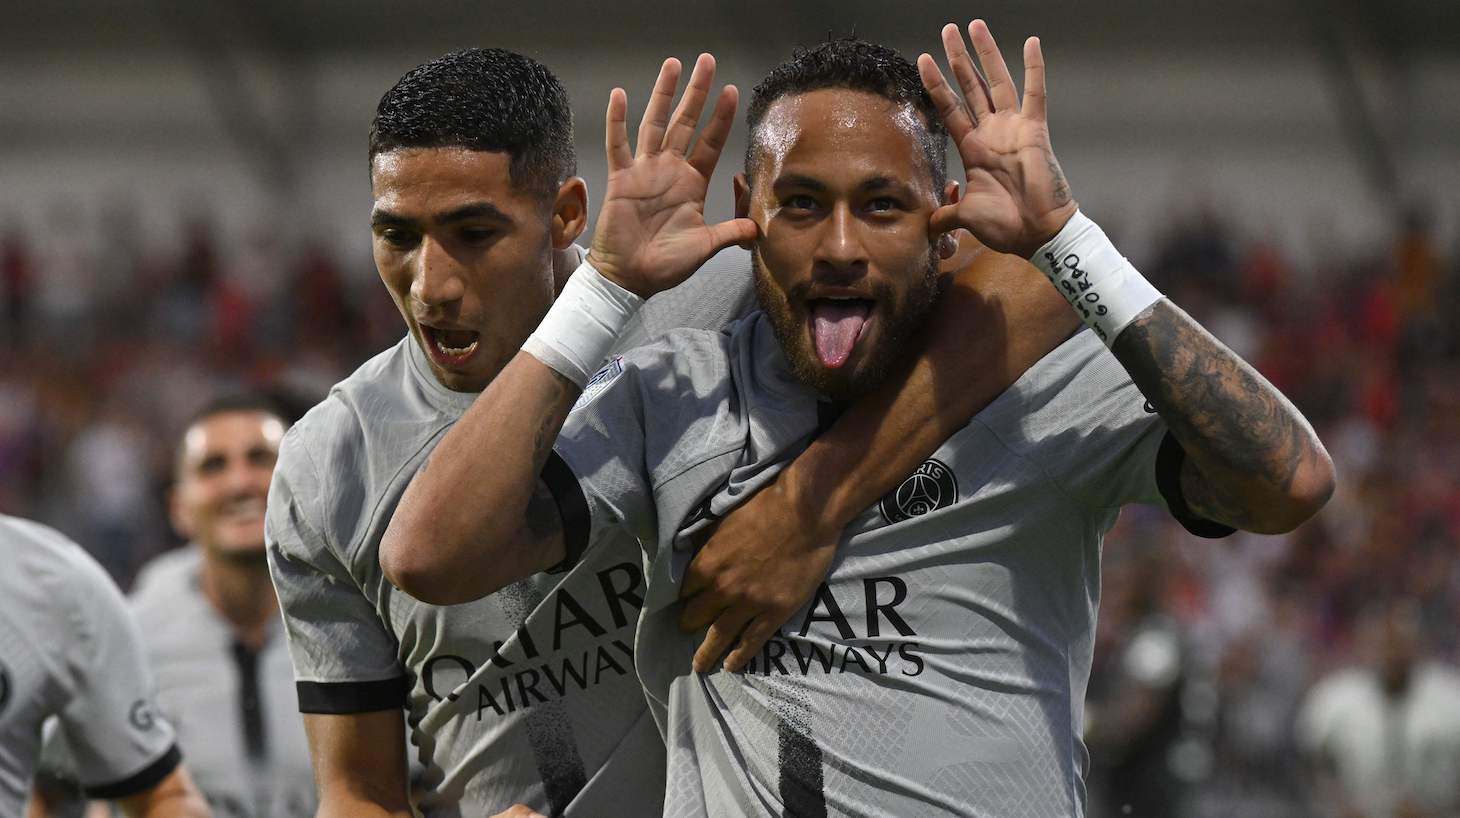 Paris Saint-Germain's Brazilian forward Neymar (R) celebrates with Paris Saint-Germain's Moroccan defender Achraf Hakimi after scoring a goal during the French L1 football match between Clermont Foot 63 and Paris Saint-Germain at Stade Gabriel Montpied in Clermont-Ferrand, central France on August 6, 2022.